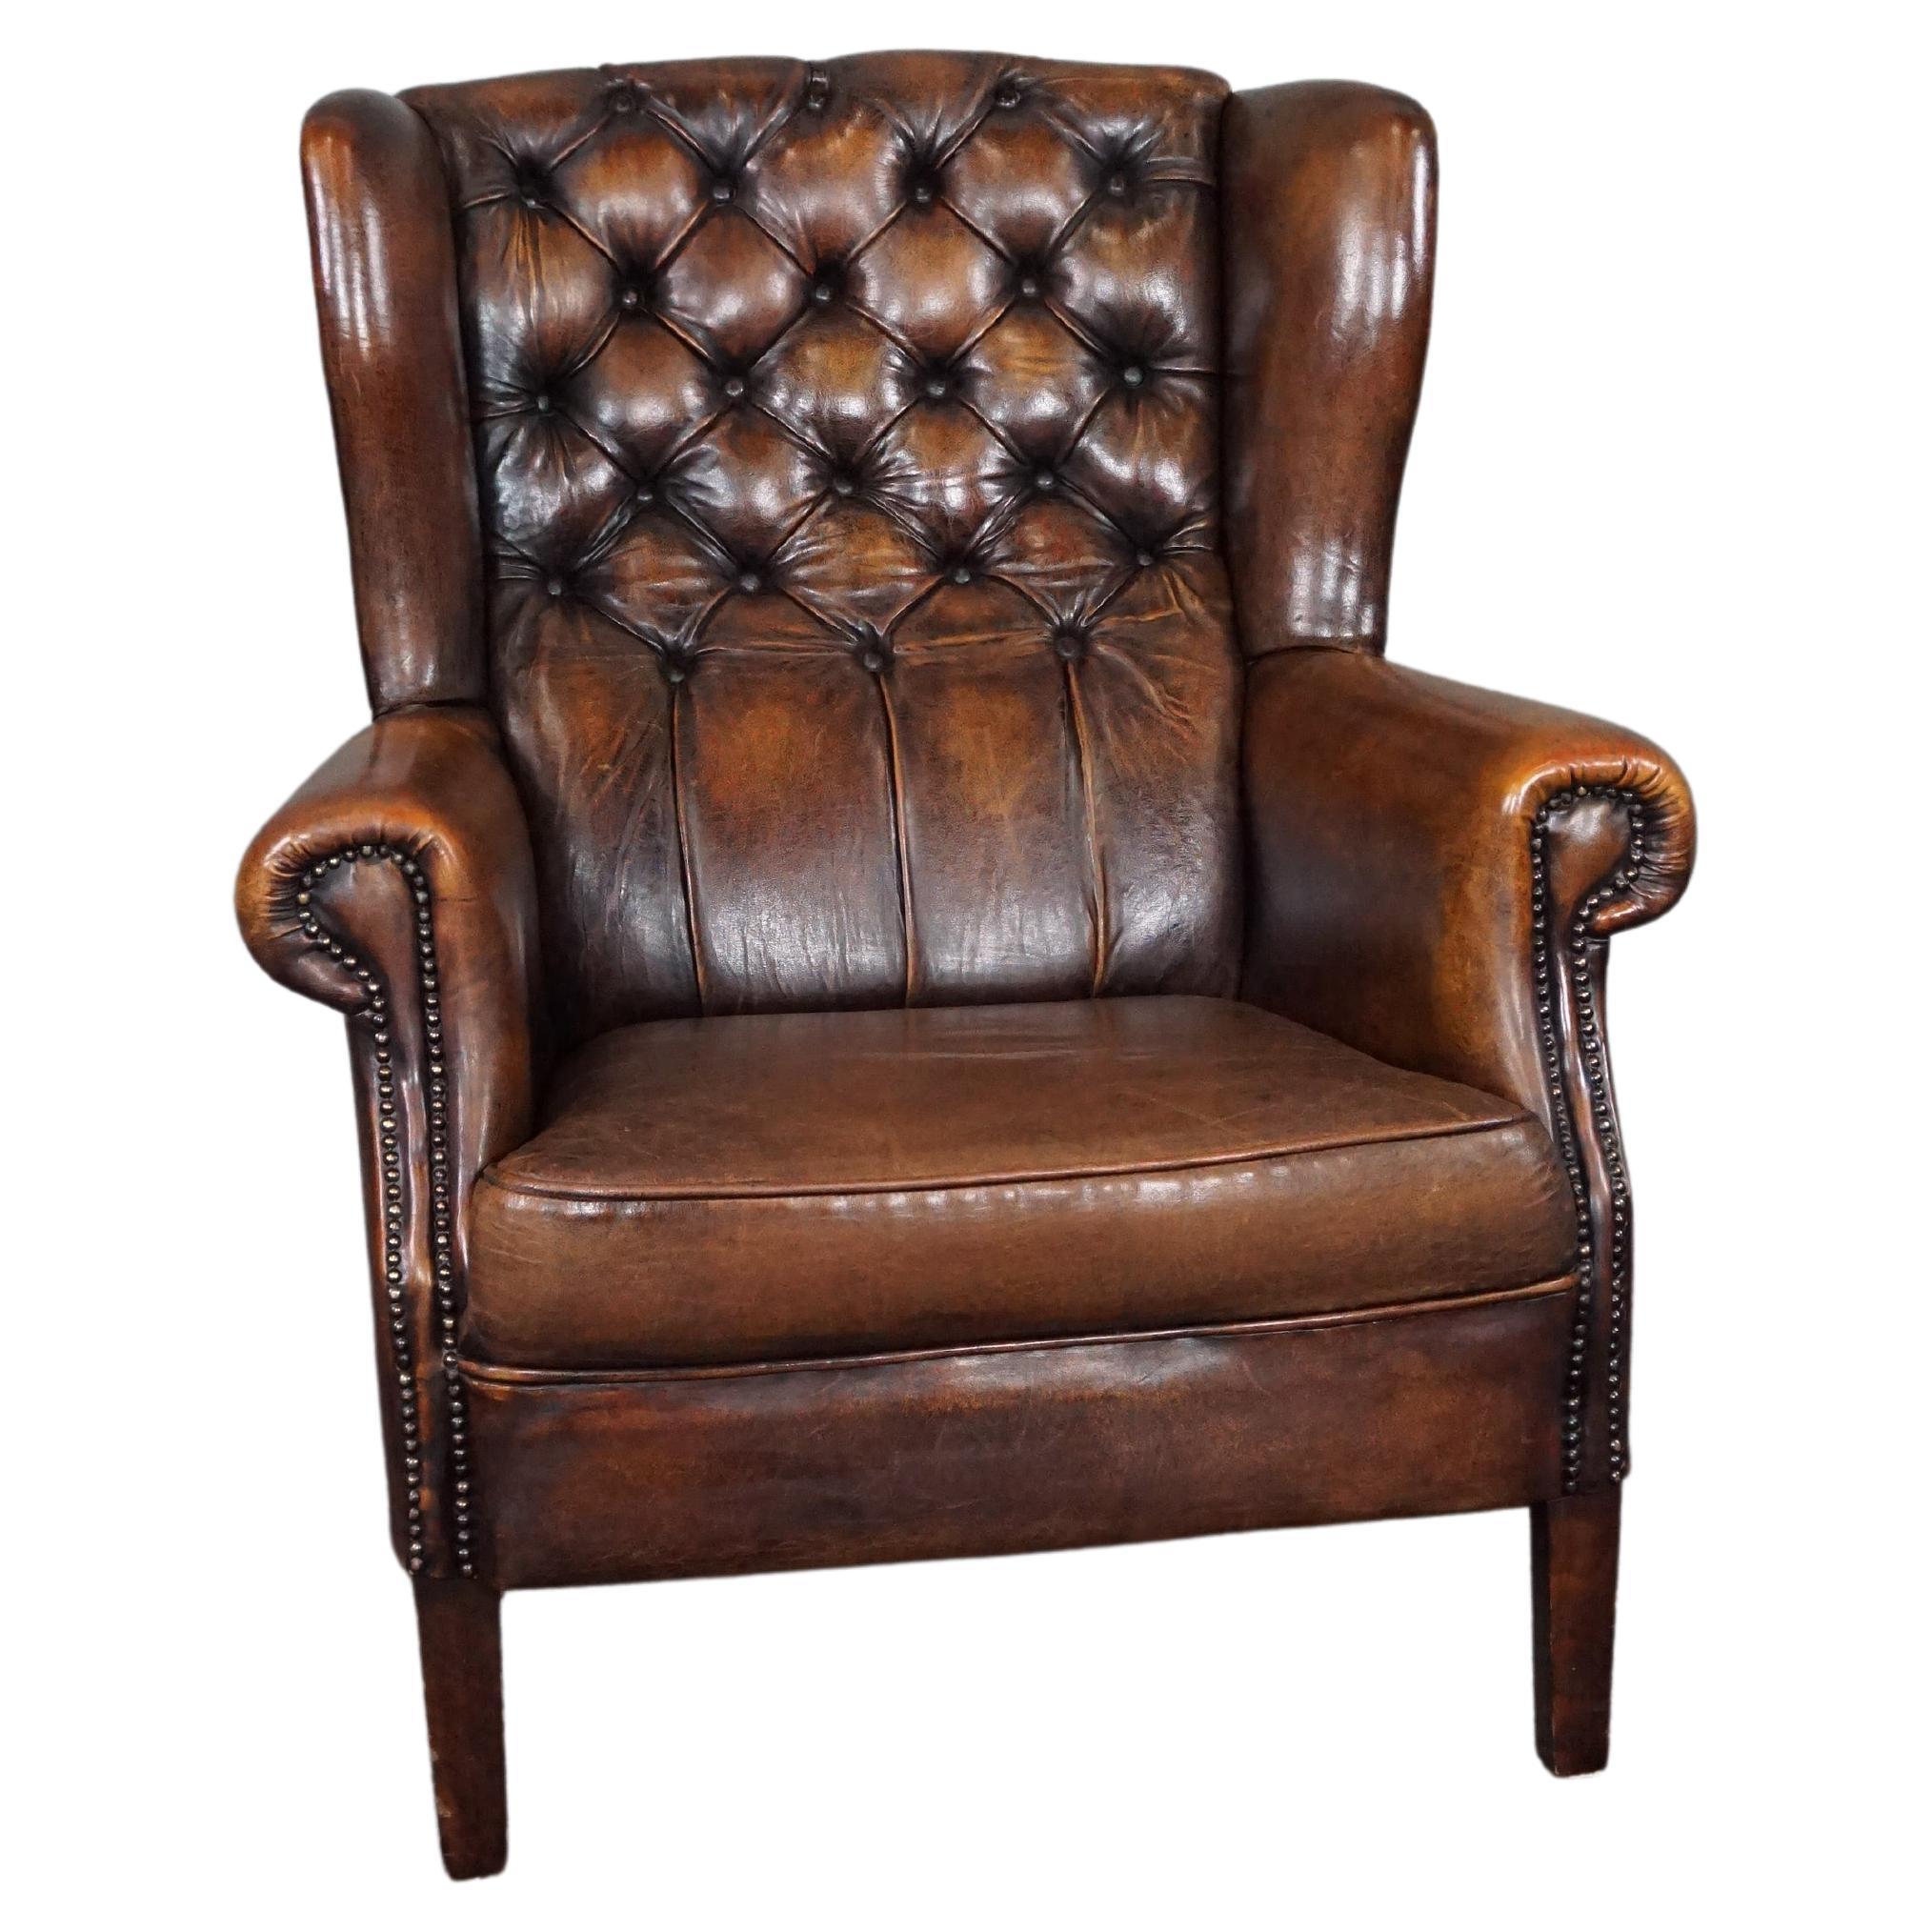 Very beautiful, rare sheep leather wing chair